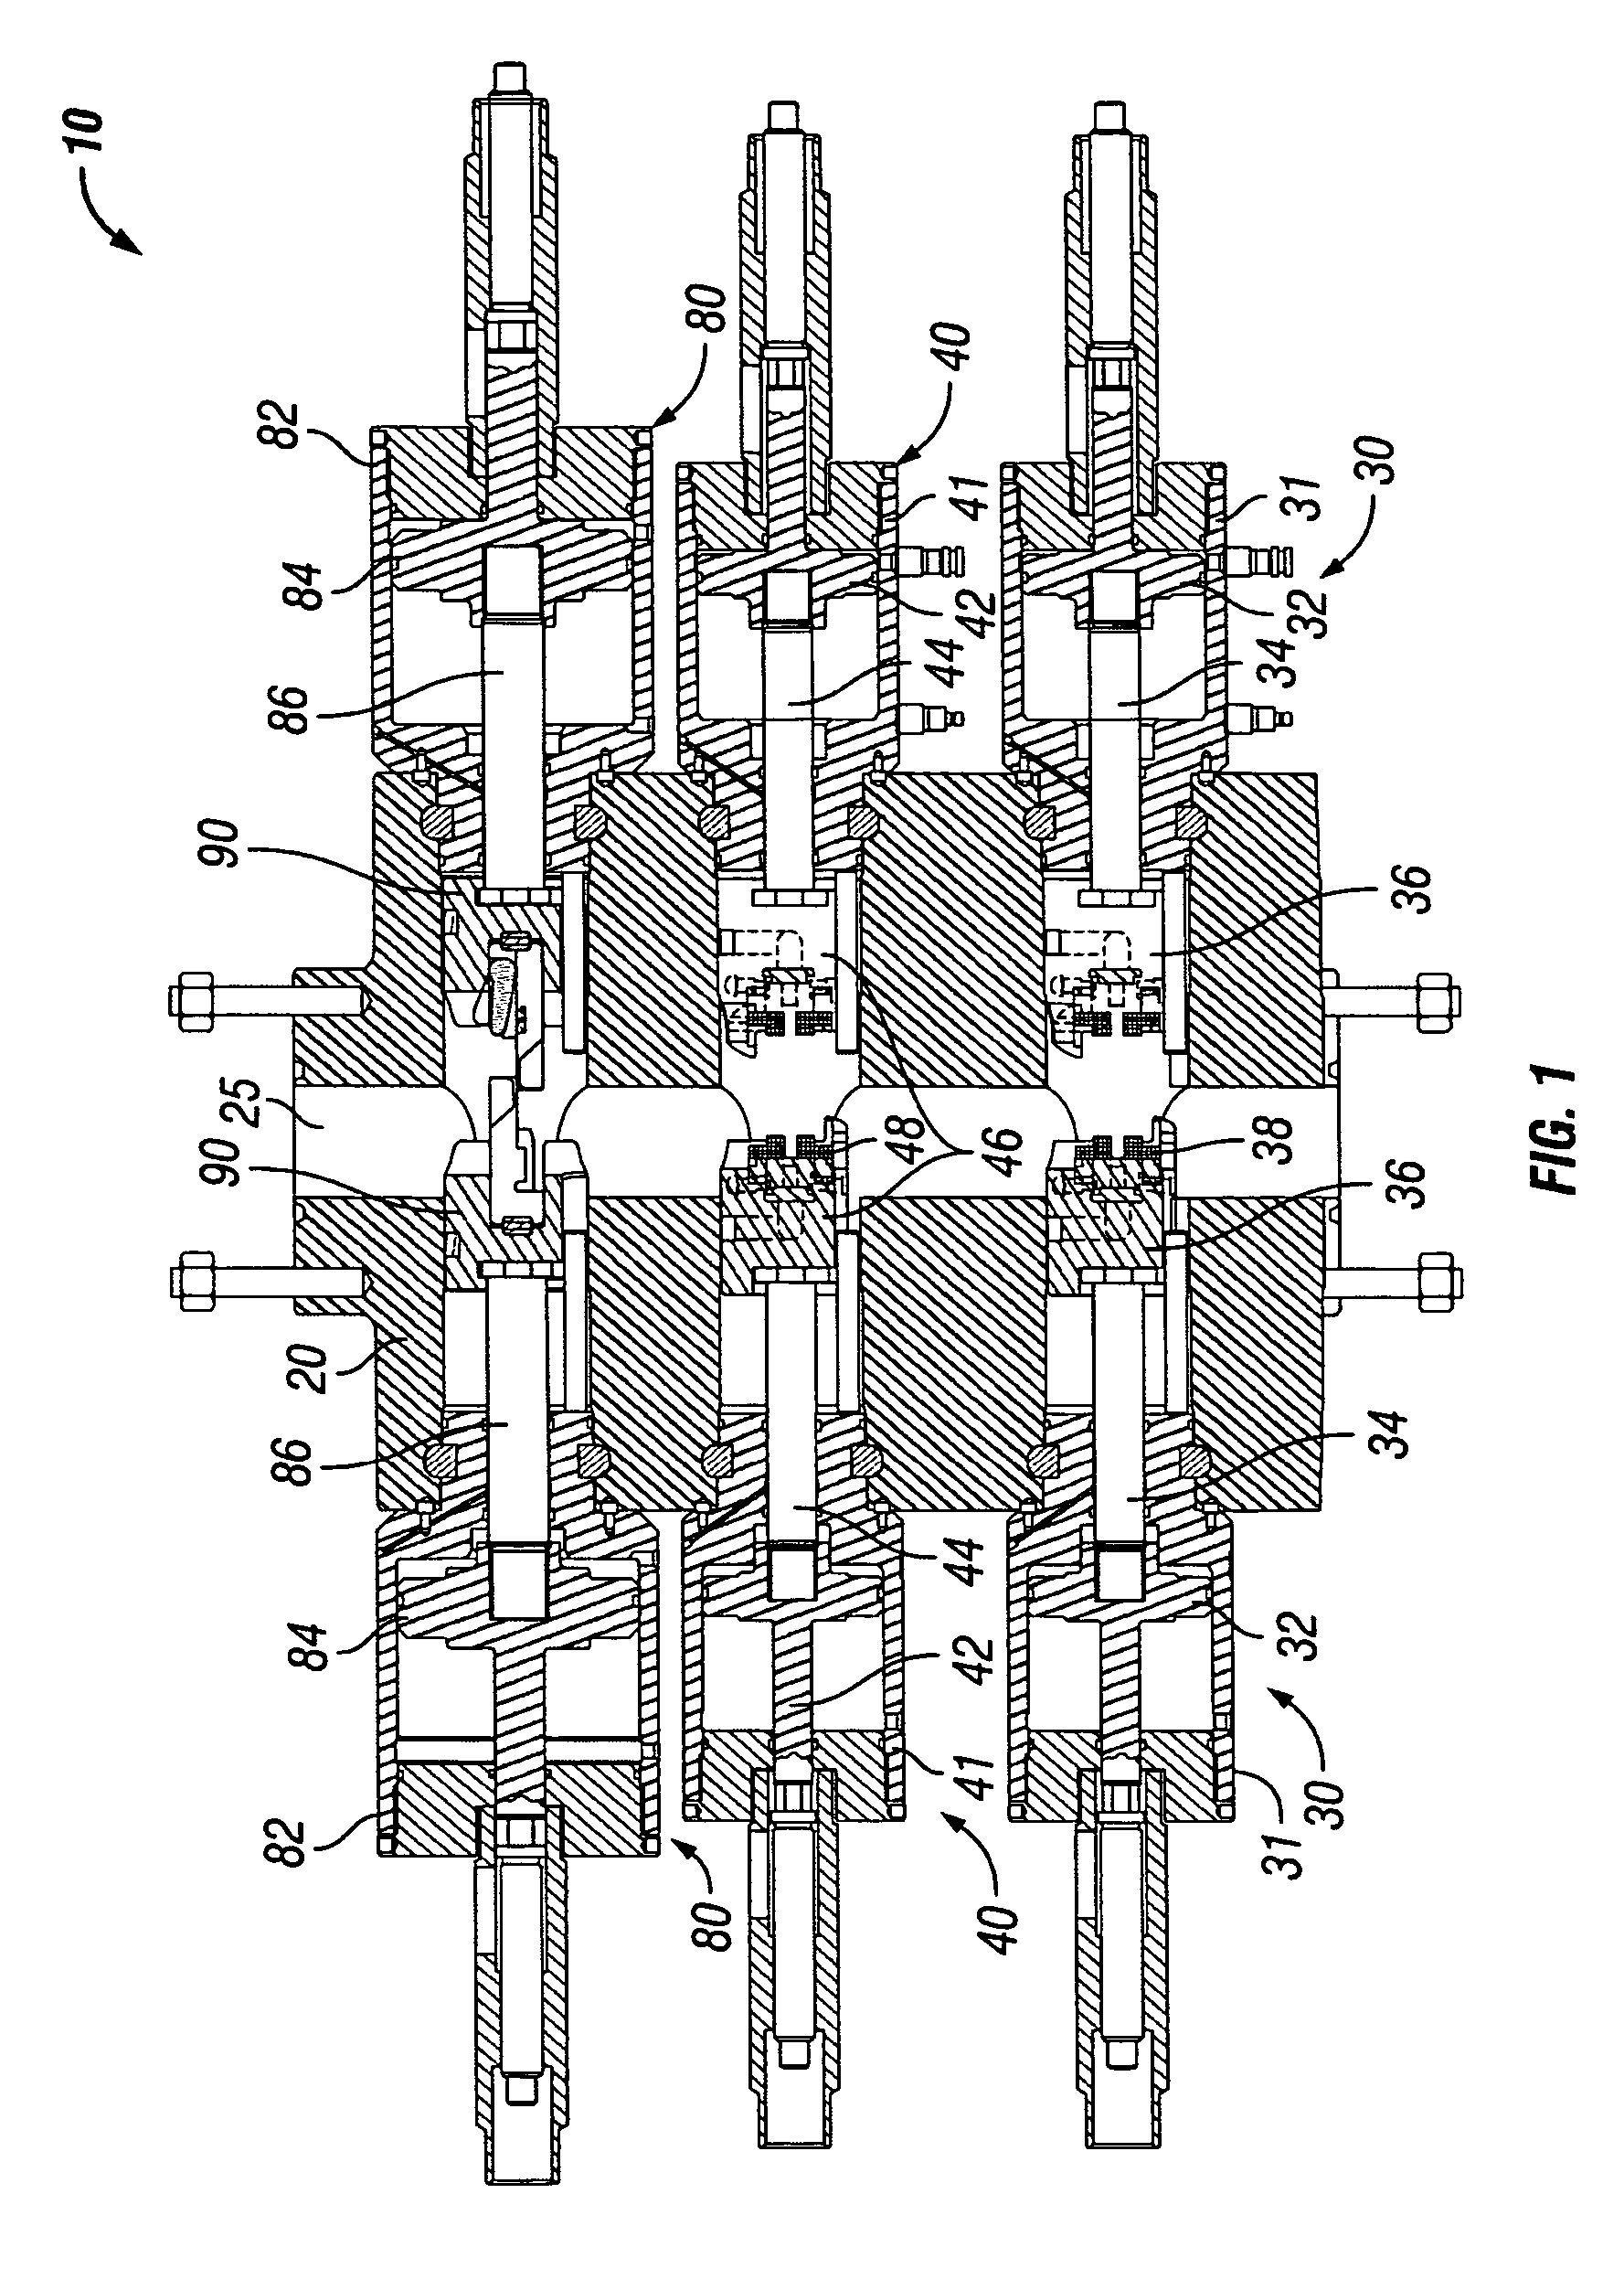 Shear/seal ram assembly for a ram-type blowout prevention system